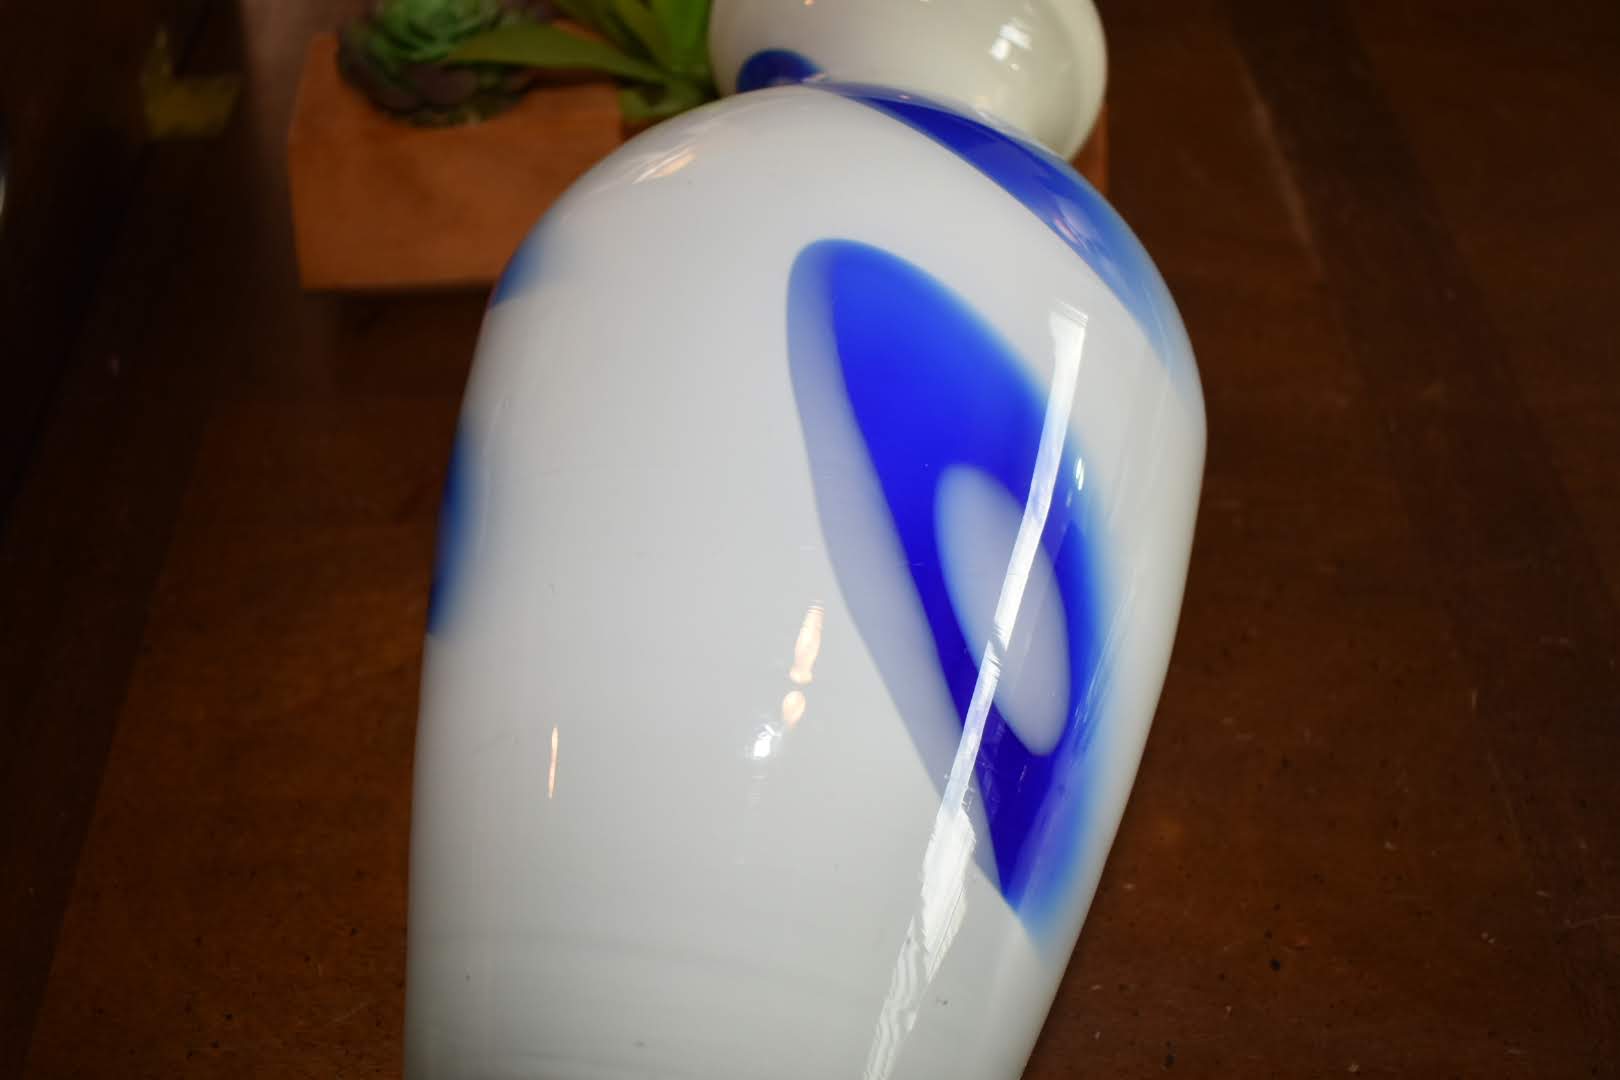 Blown Opaque Glass - White and blue color - Vase Decor - Mid Century